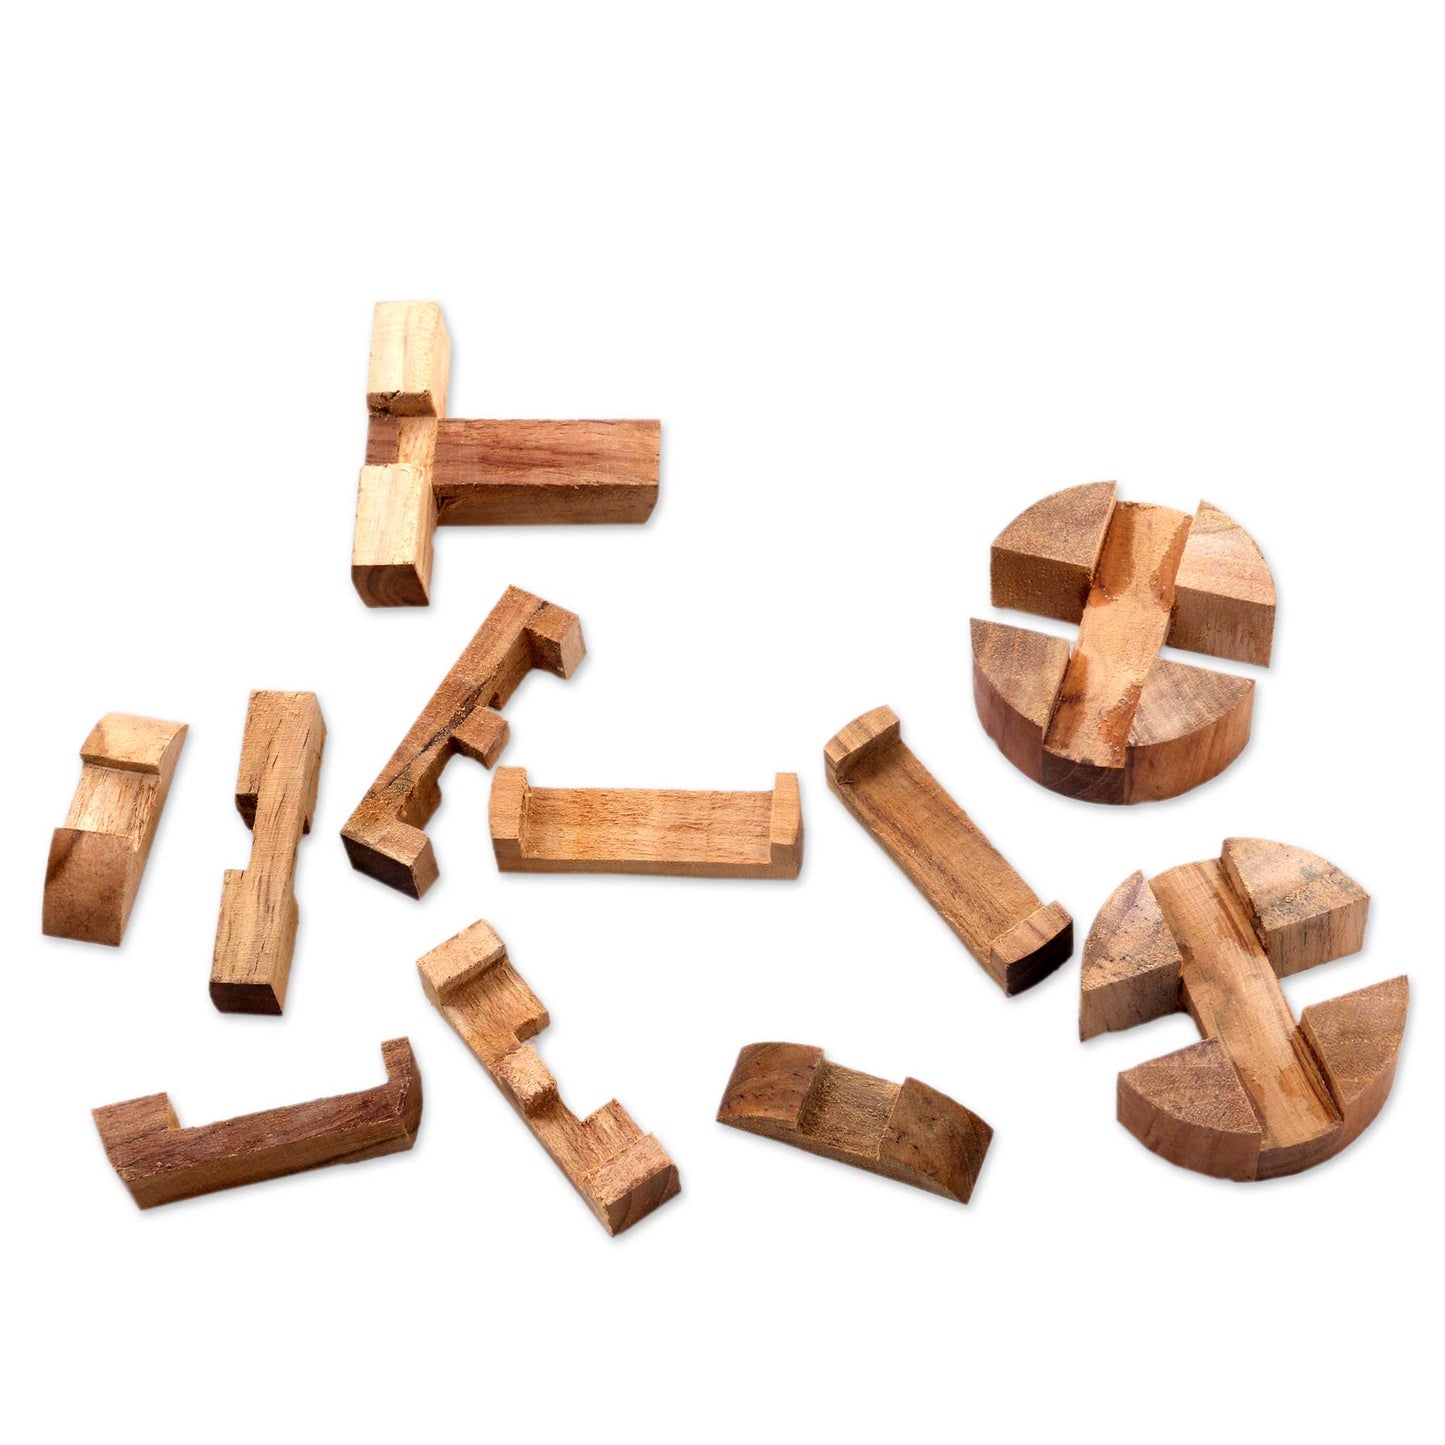 Forest Cylinder Challenging 3-D Puzzle Artwork Handcrafted of Teak Wood